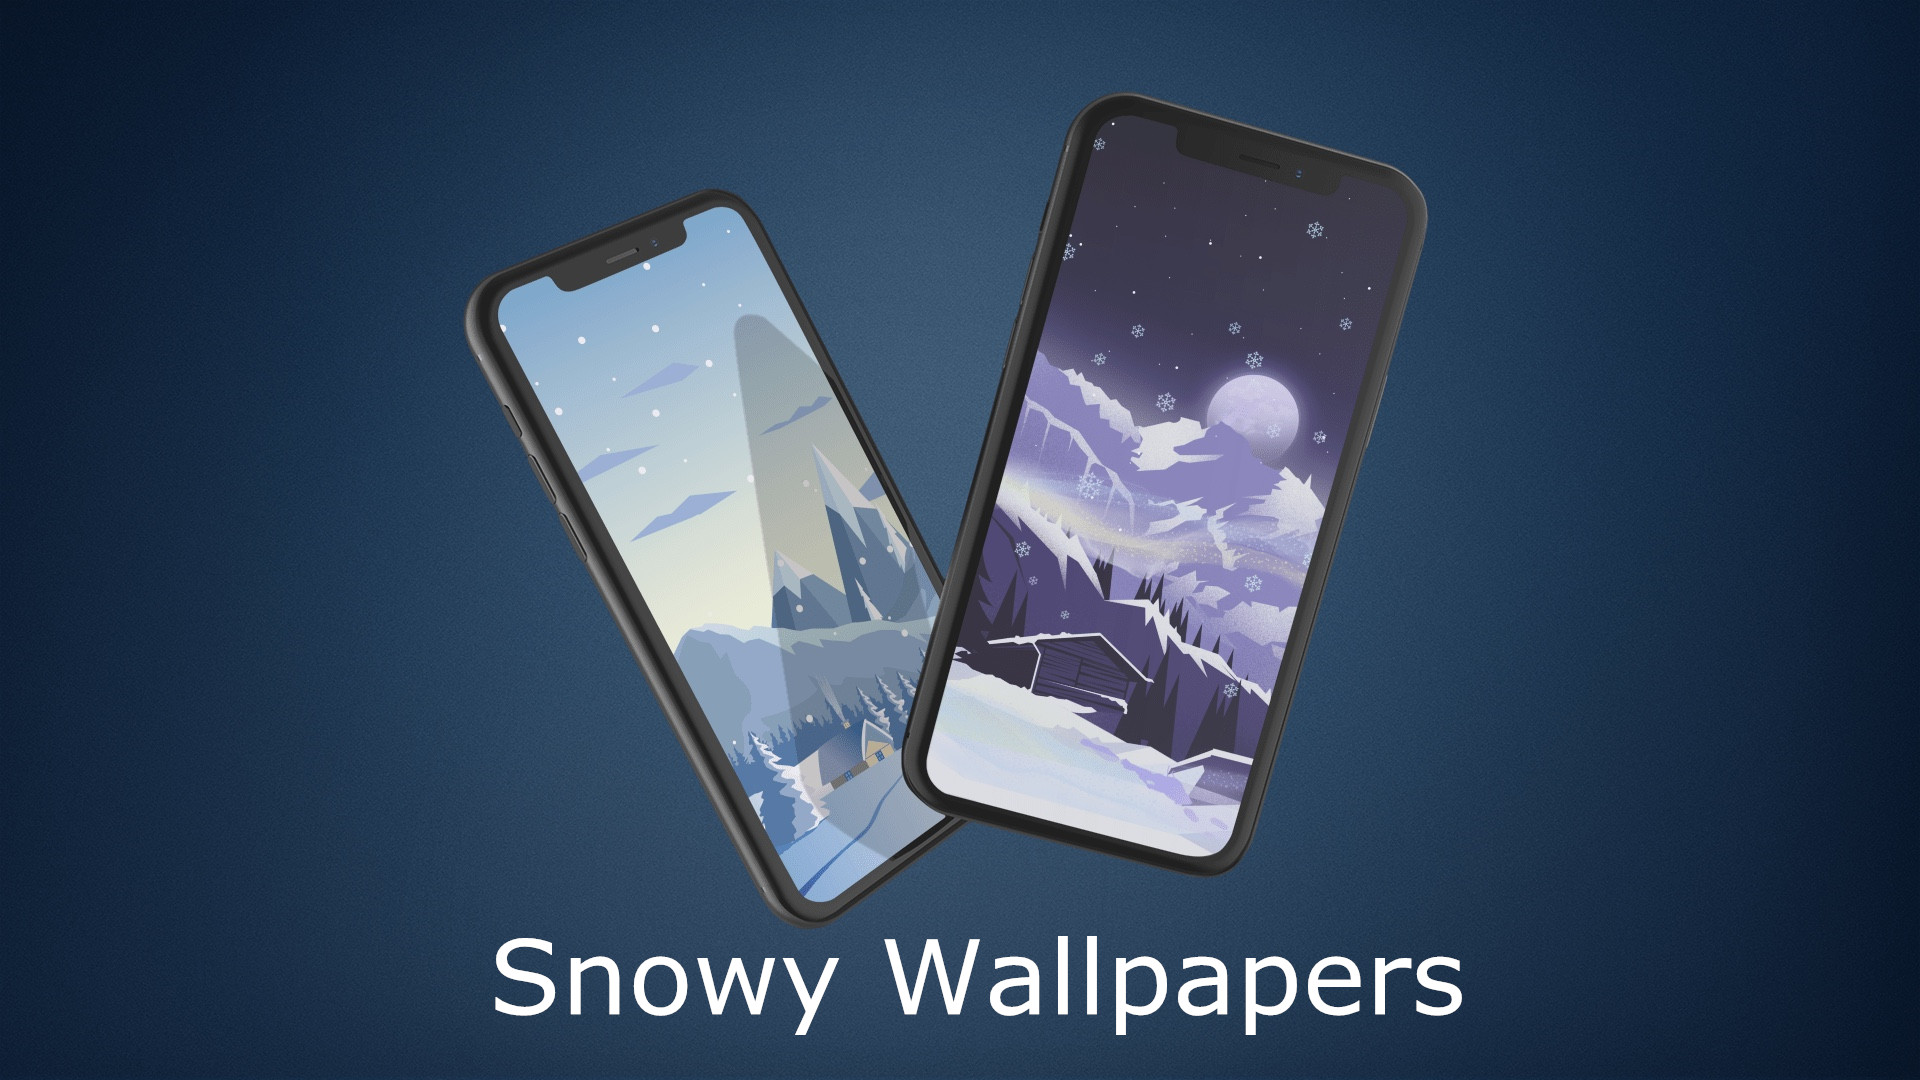 Snowy Wallpaper Illustrations for iPhone